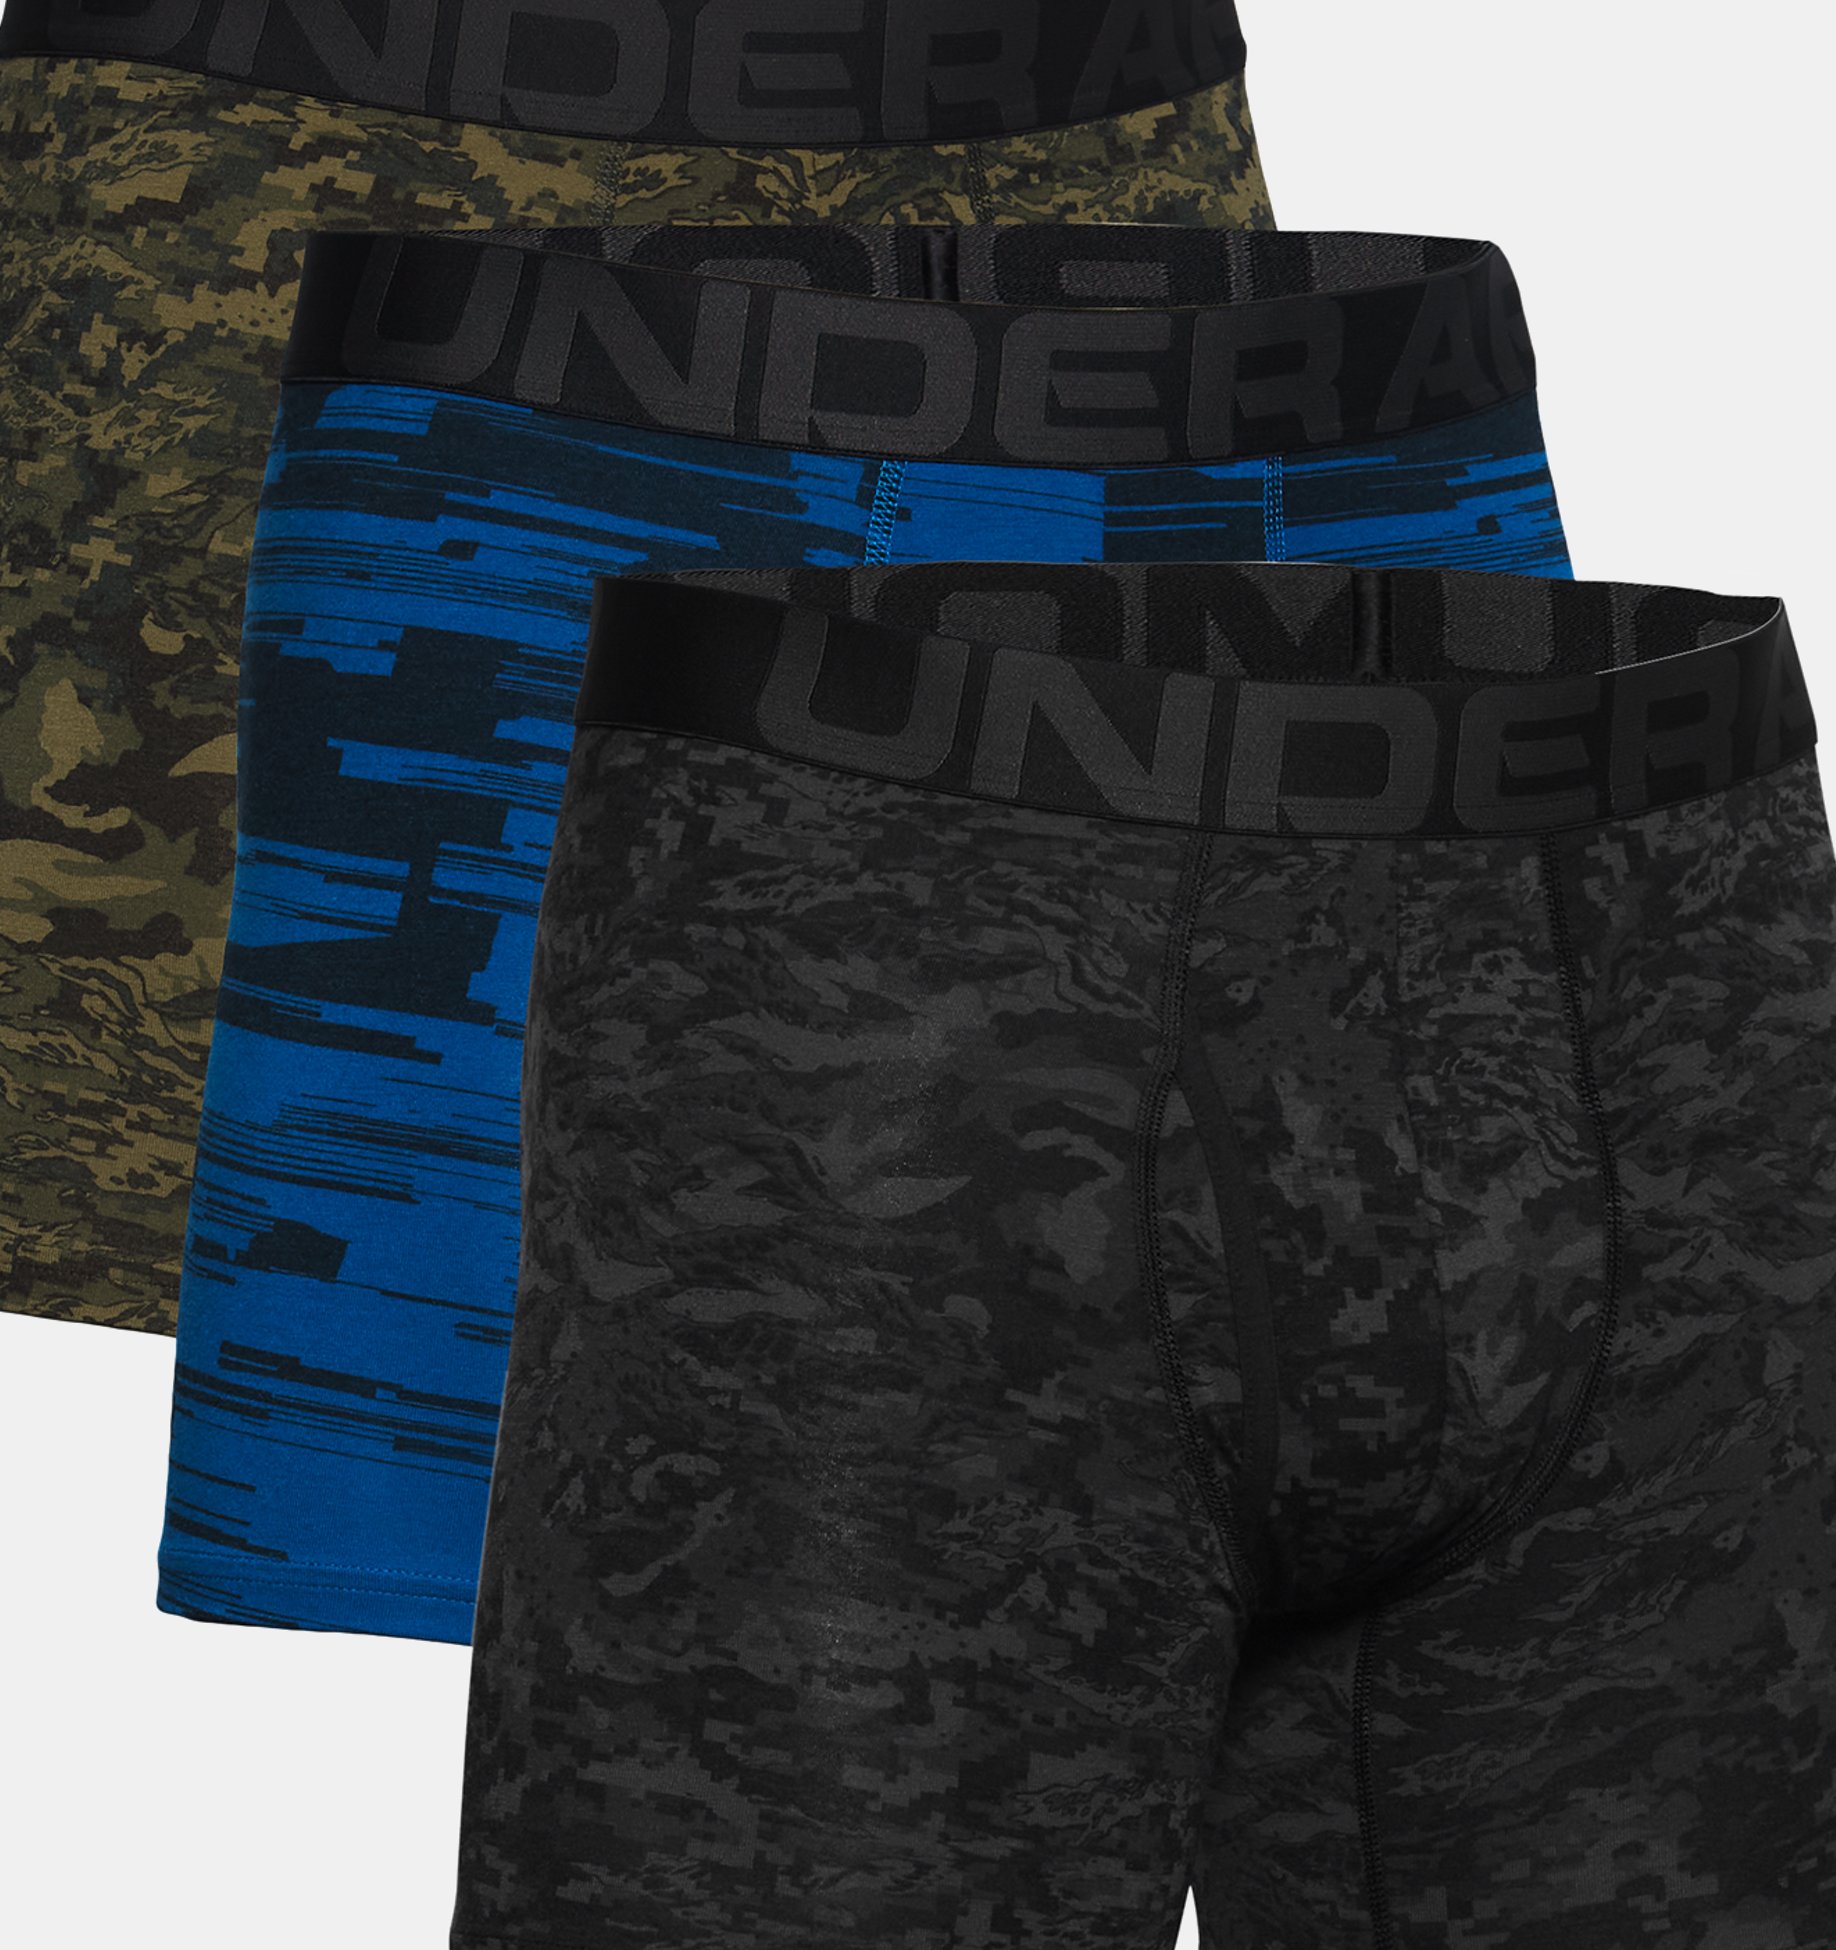 Under Armour Charged cotton 3 pack trunks in black